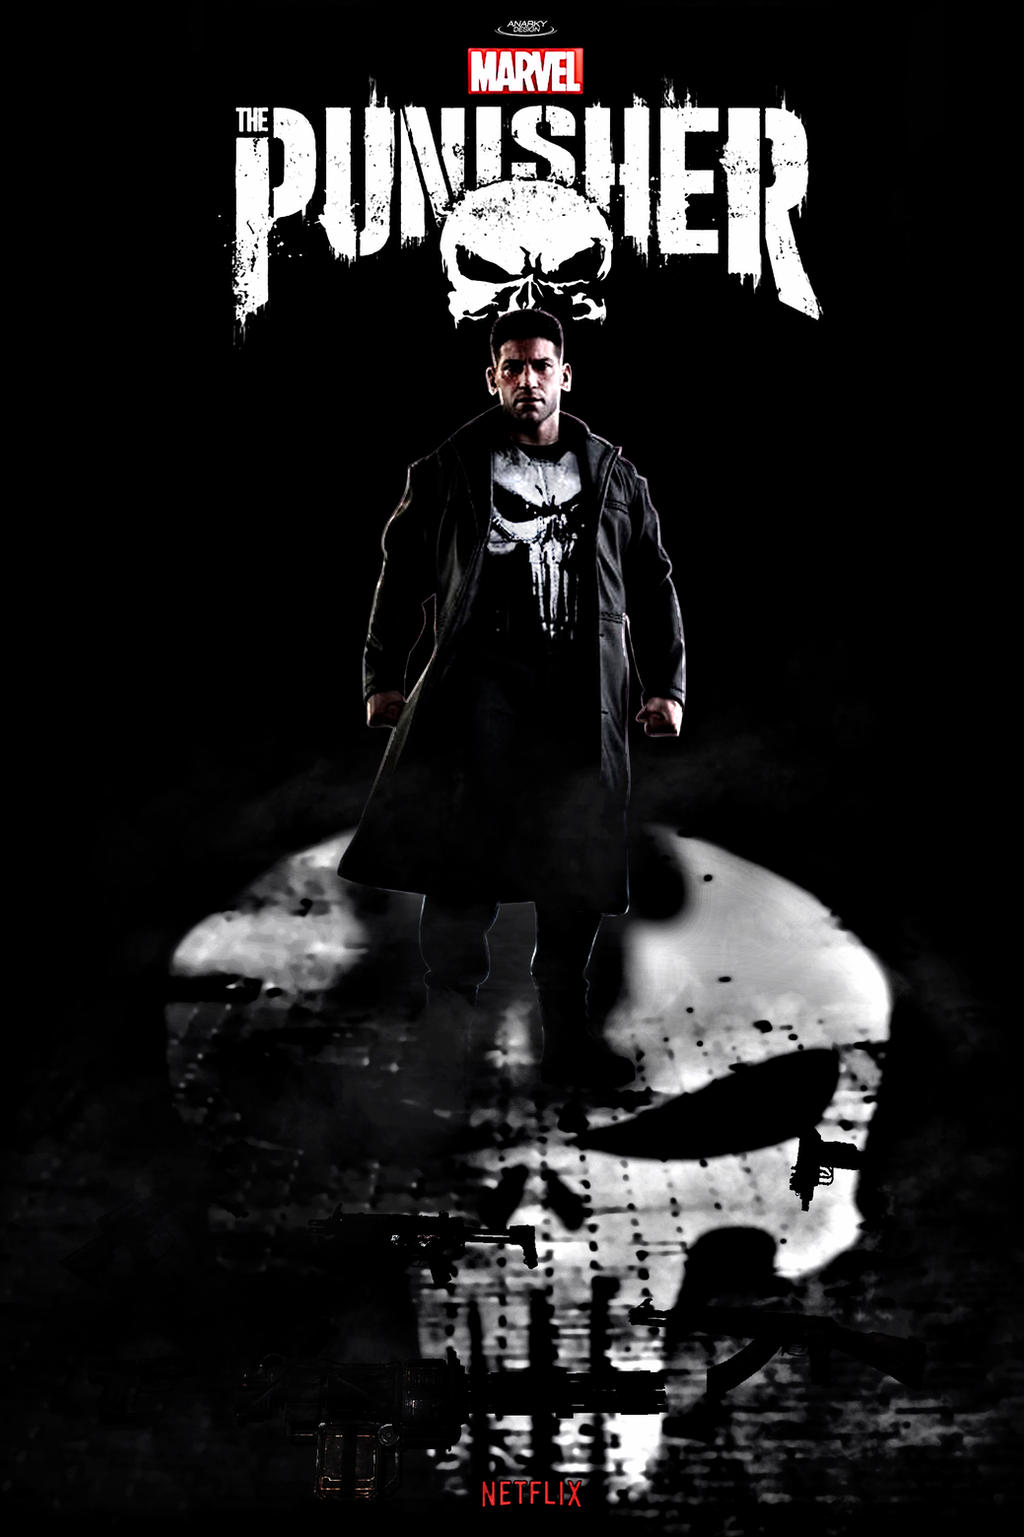 The Punisher Wallpaper by nmkhronos on DeviantArt